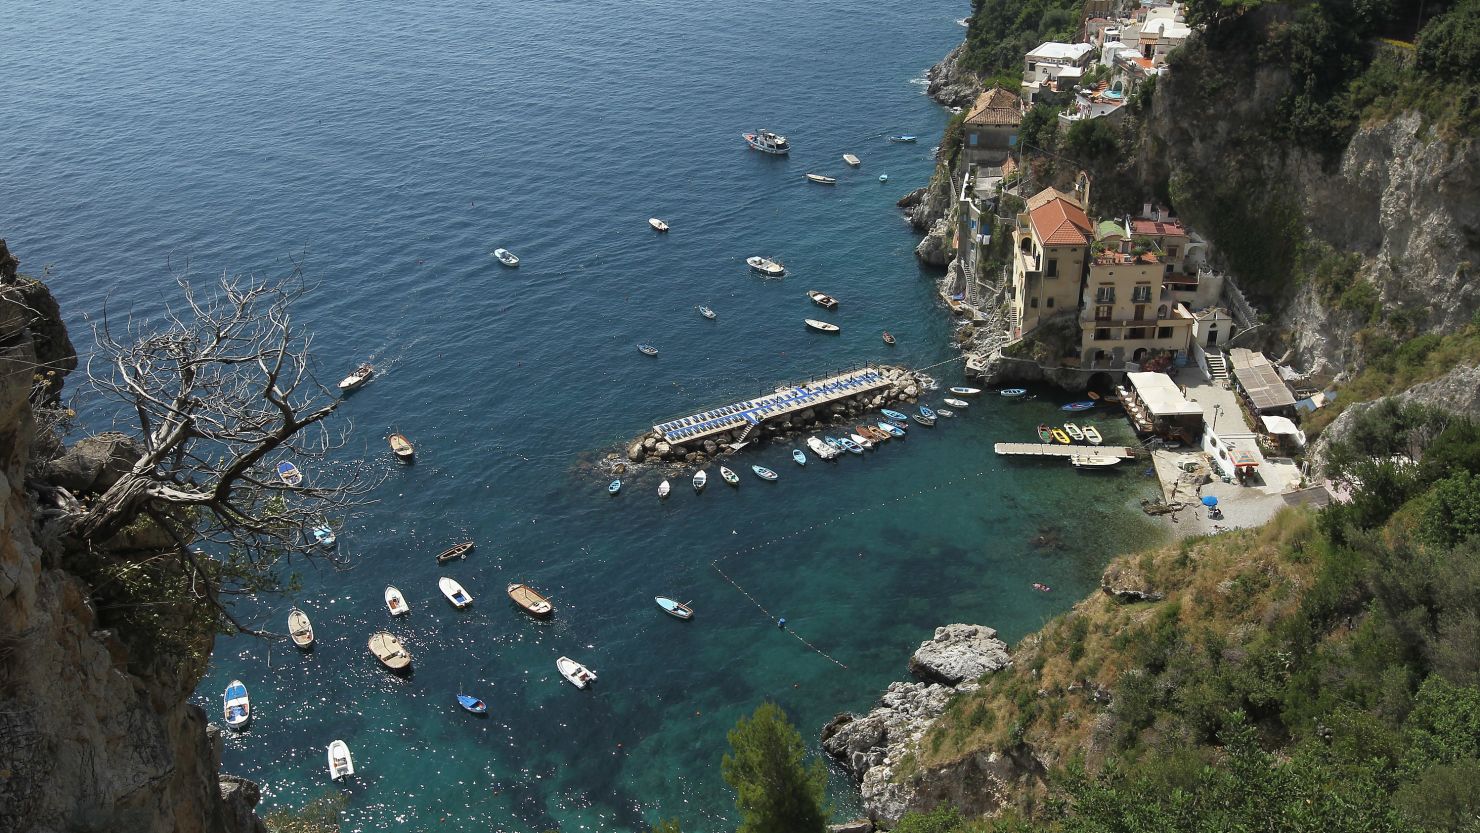 The port of Palinuro is located at the opposite end of the Amalfi coast (pictured) in Salerno Province, Italy.